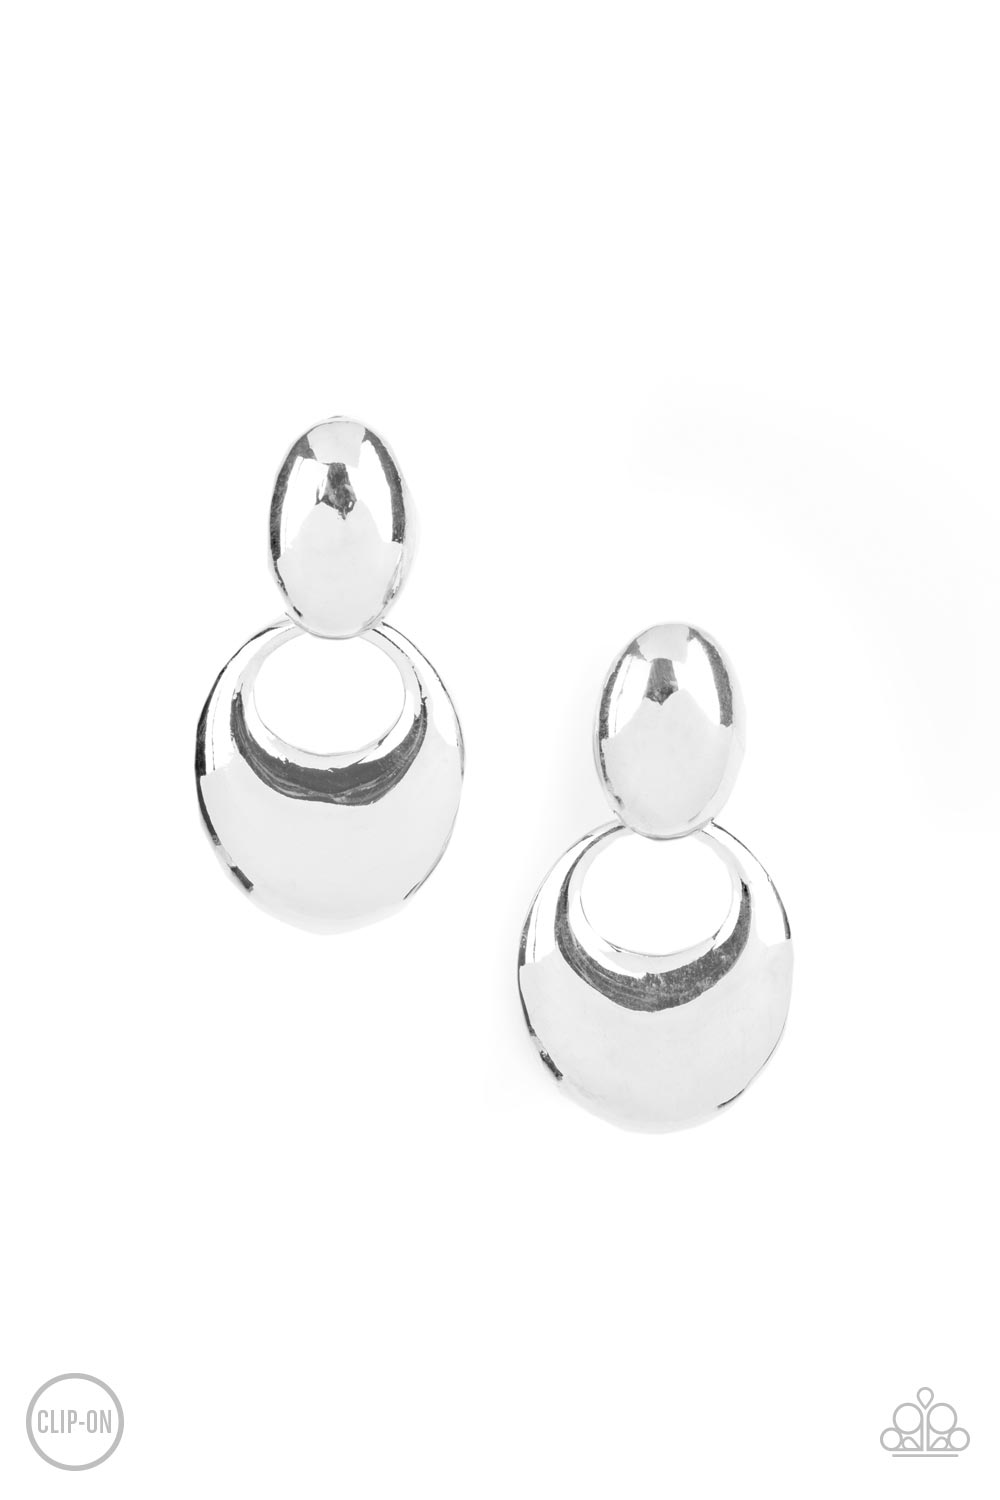 Urban Artistry - Silver Earrings Clip On - Paparazzi Accessories